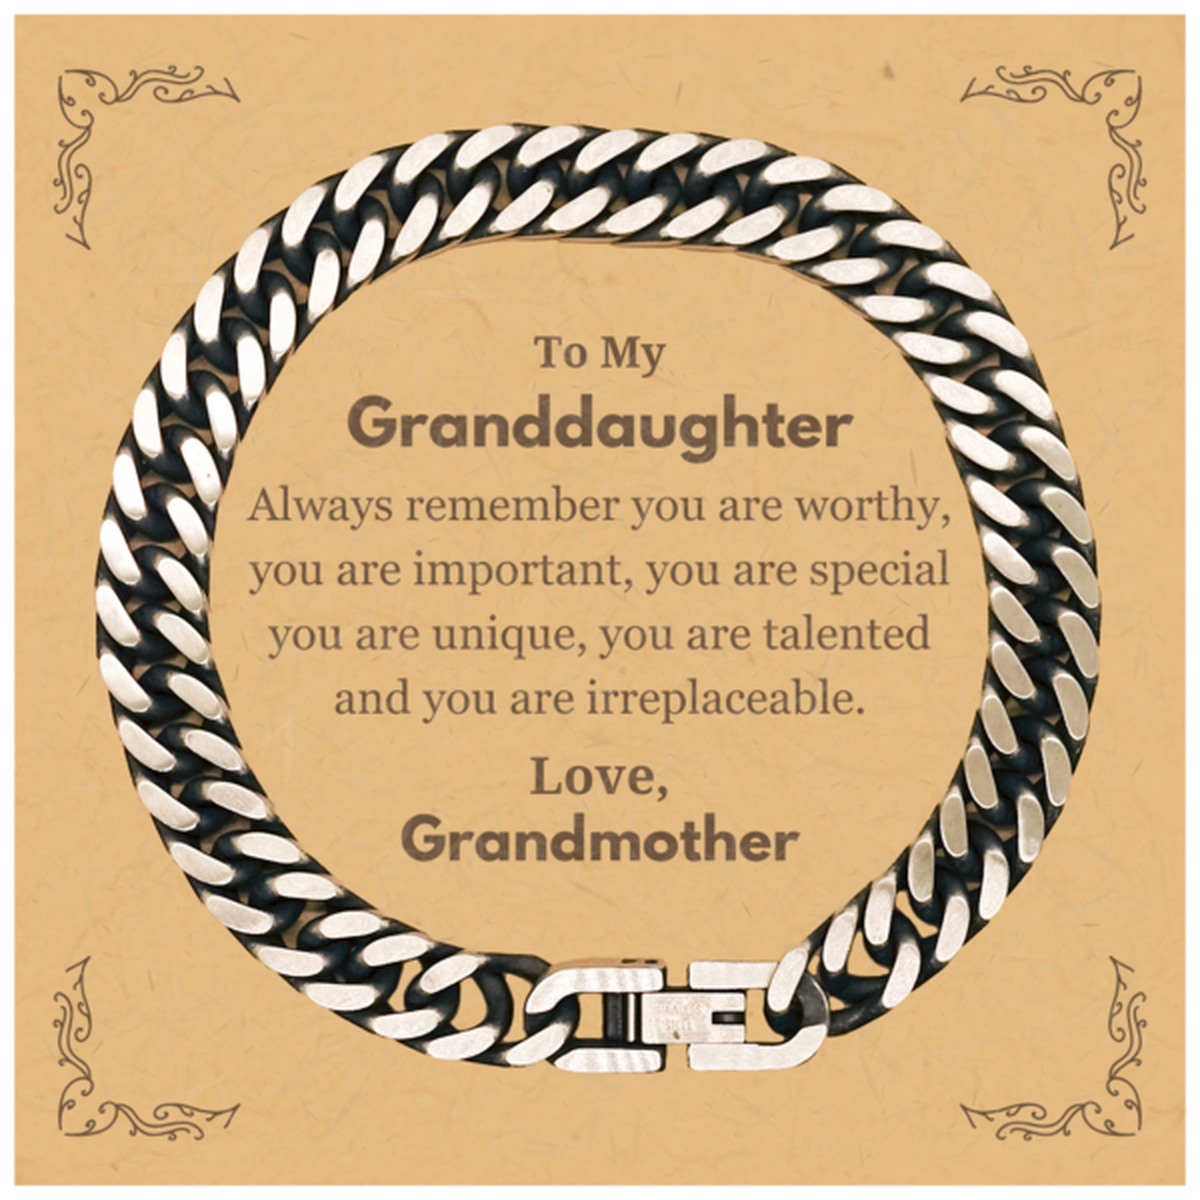 Granddaughter Birthday Gifts from Grandmother, Inspirational Cuban Link Chain Bracelet for Granddaughter Christmas Graduation Gifts for Granddaughter Always remember you are worthy, you are important. Love, Grandmother